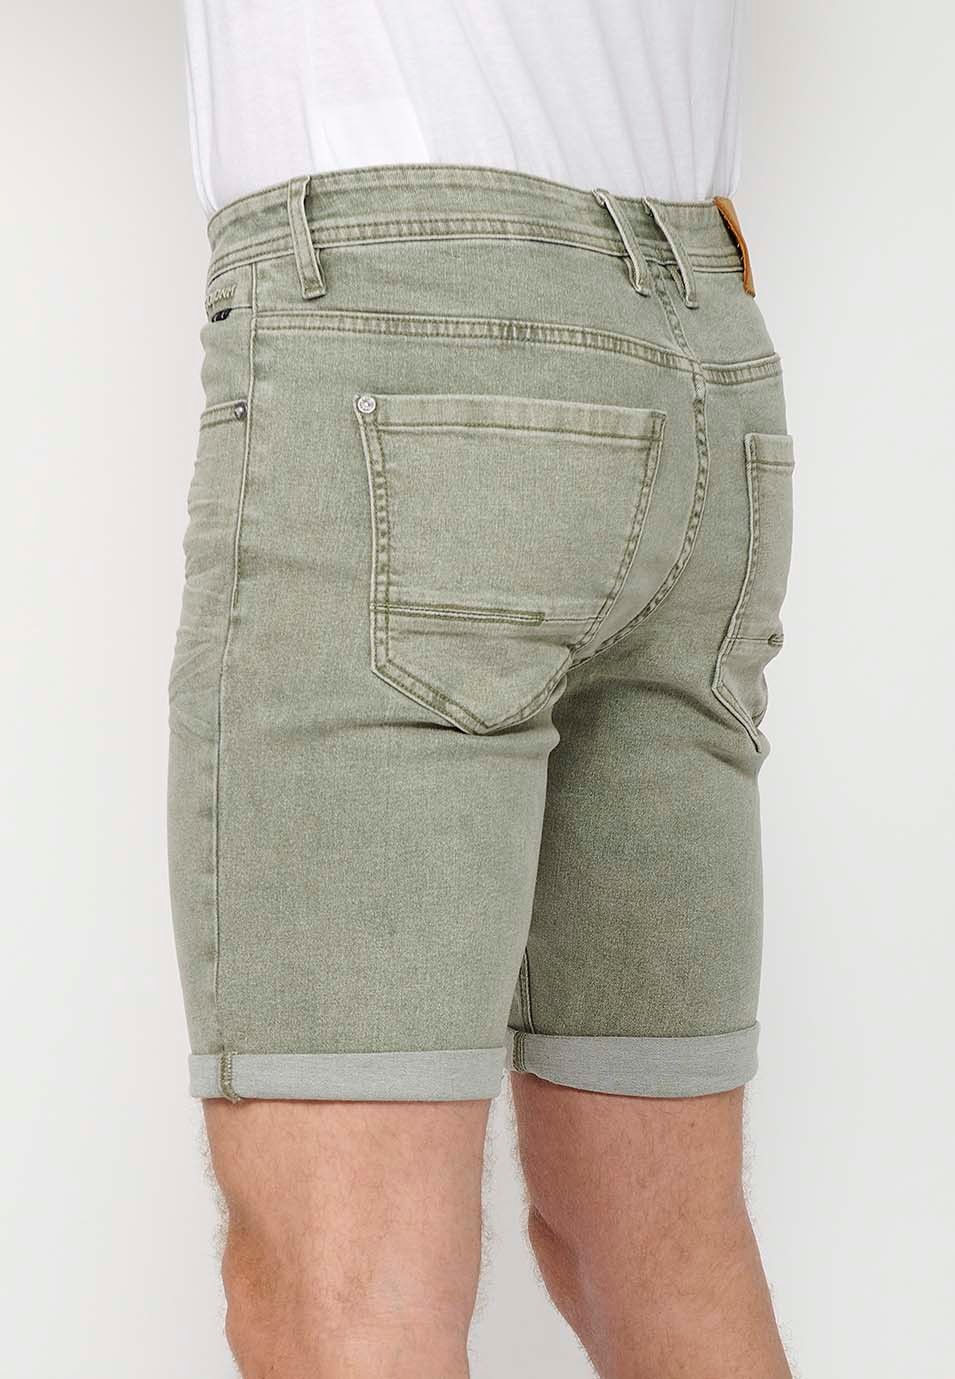 Shorts with a turn-up finish with front zipper and button closure and five pockets, one with a match pocket, in Green for Men 6